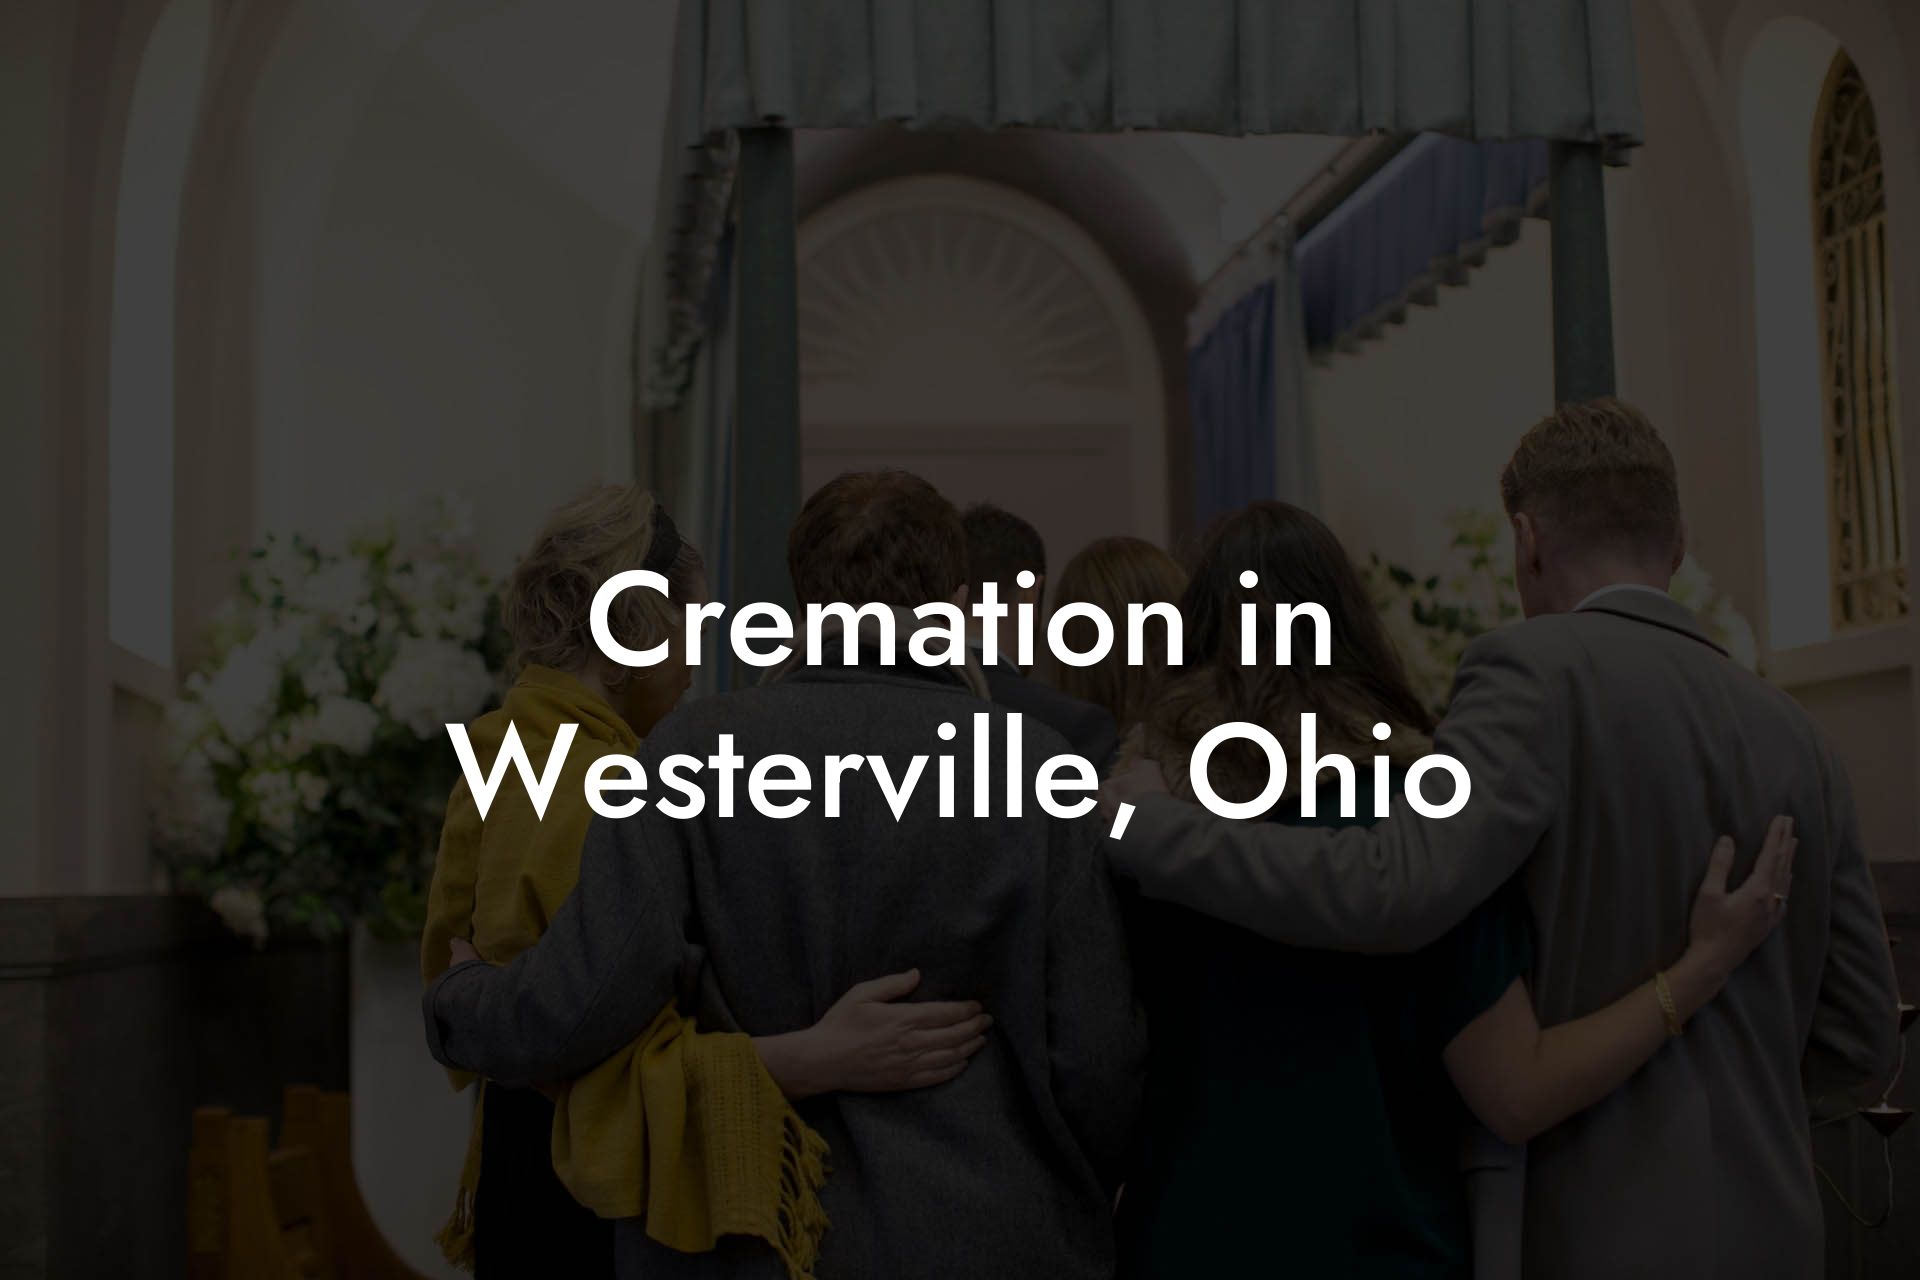 Cremation in Westerville, Ohio